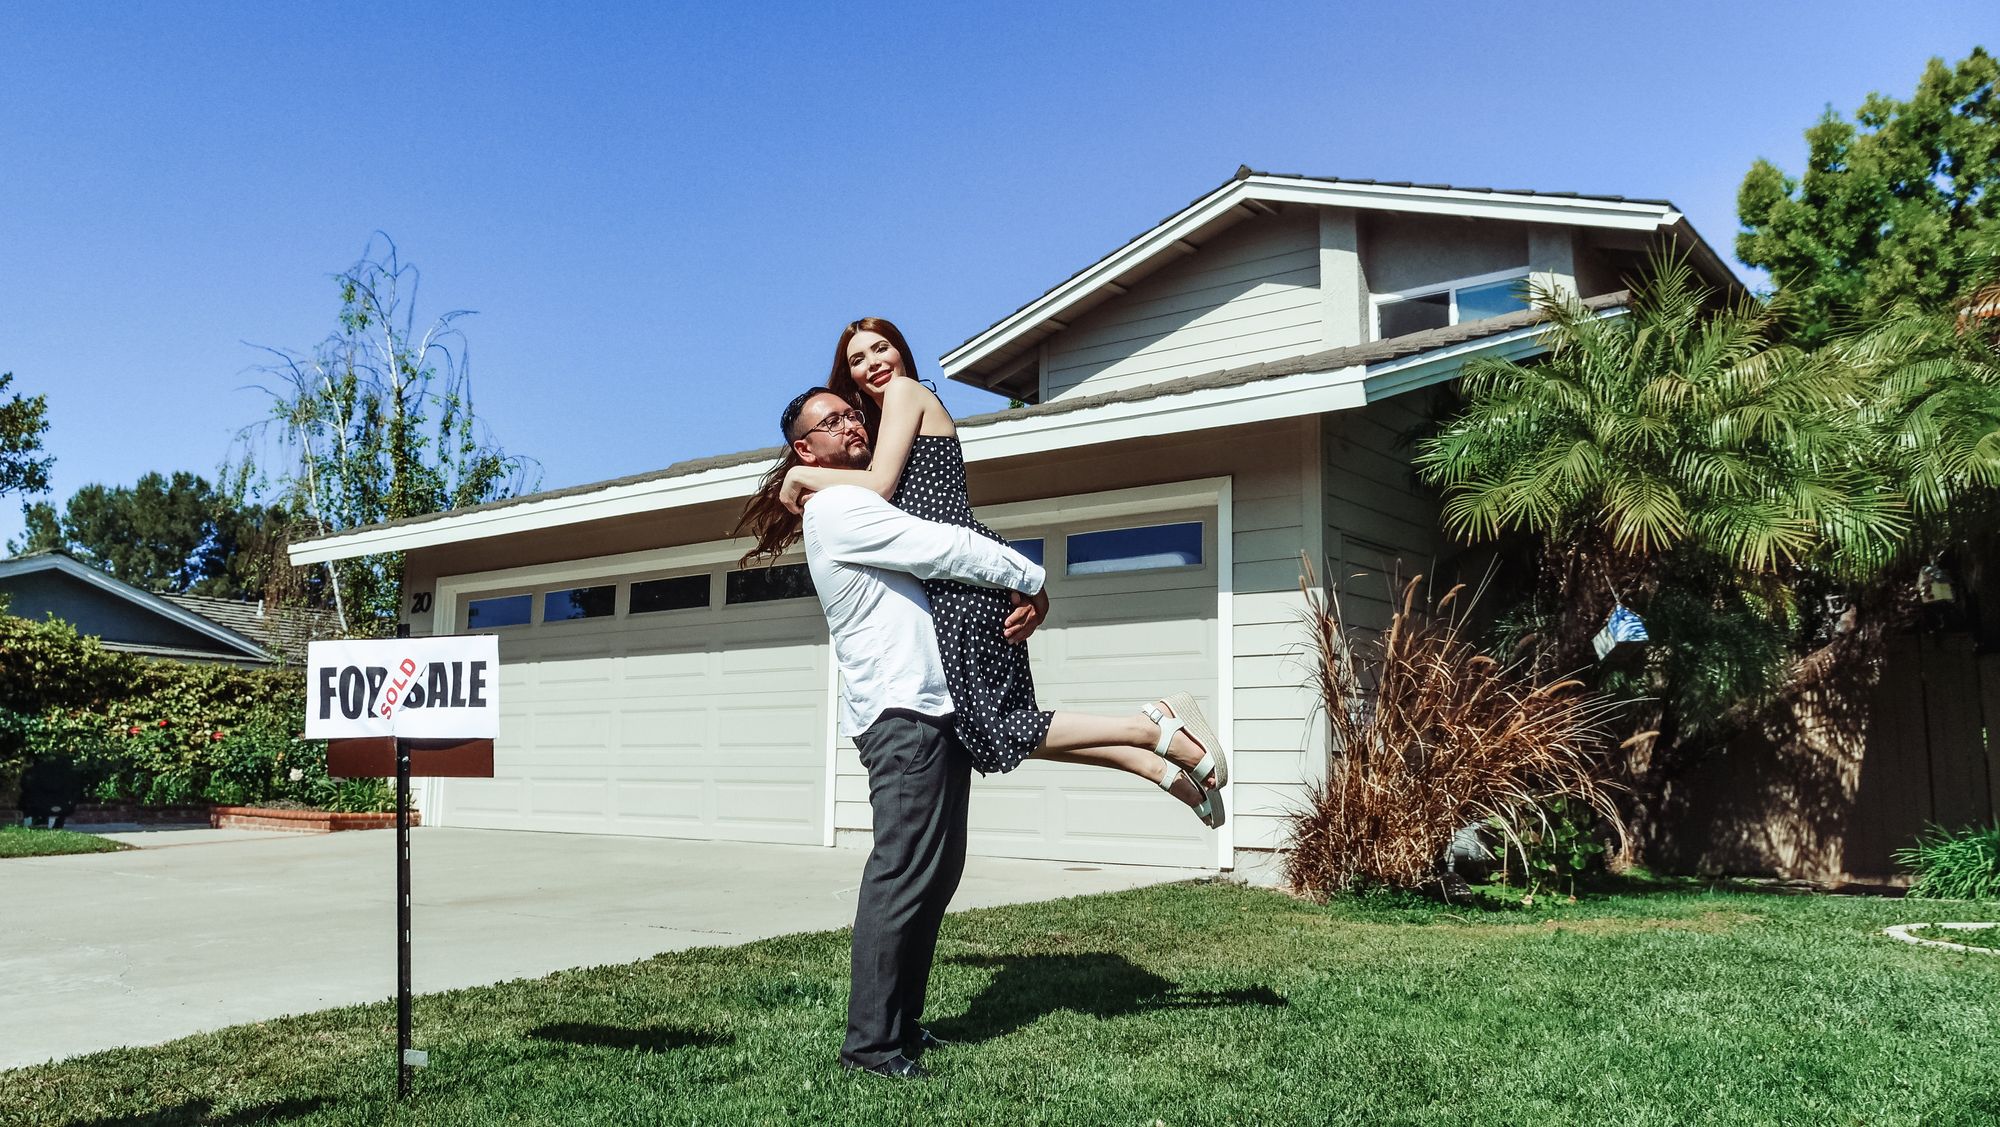 Off-Market on Zillow: What You Need to Know